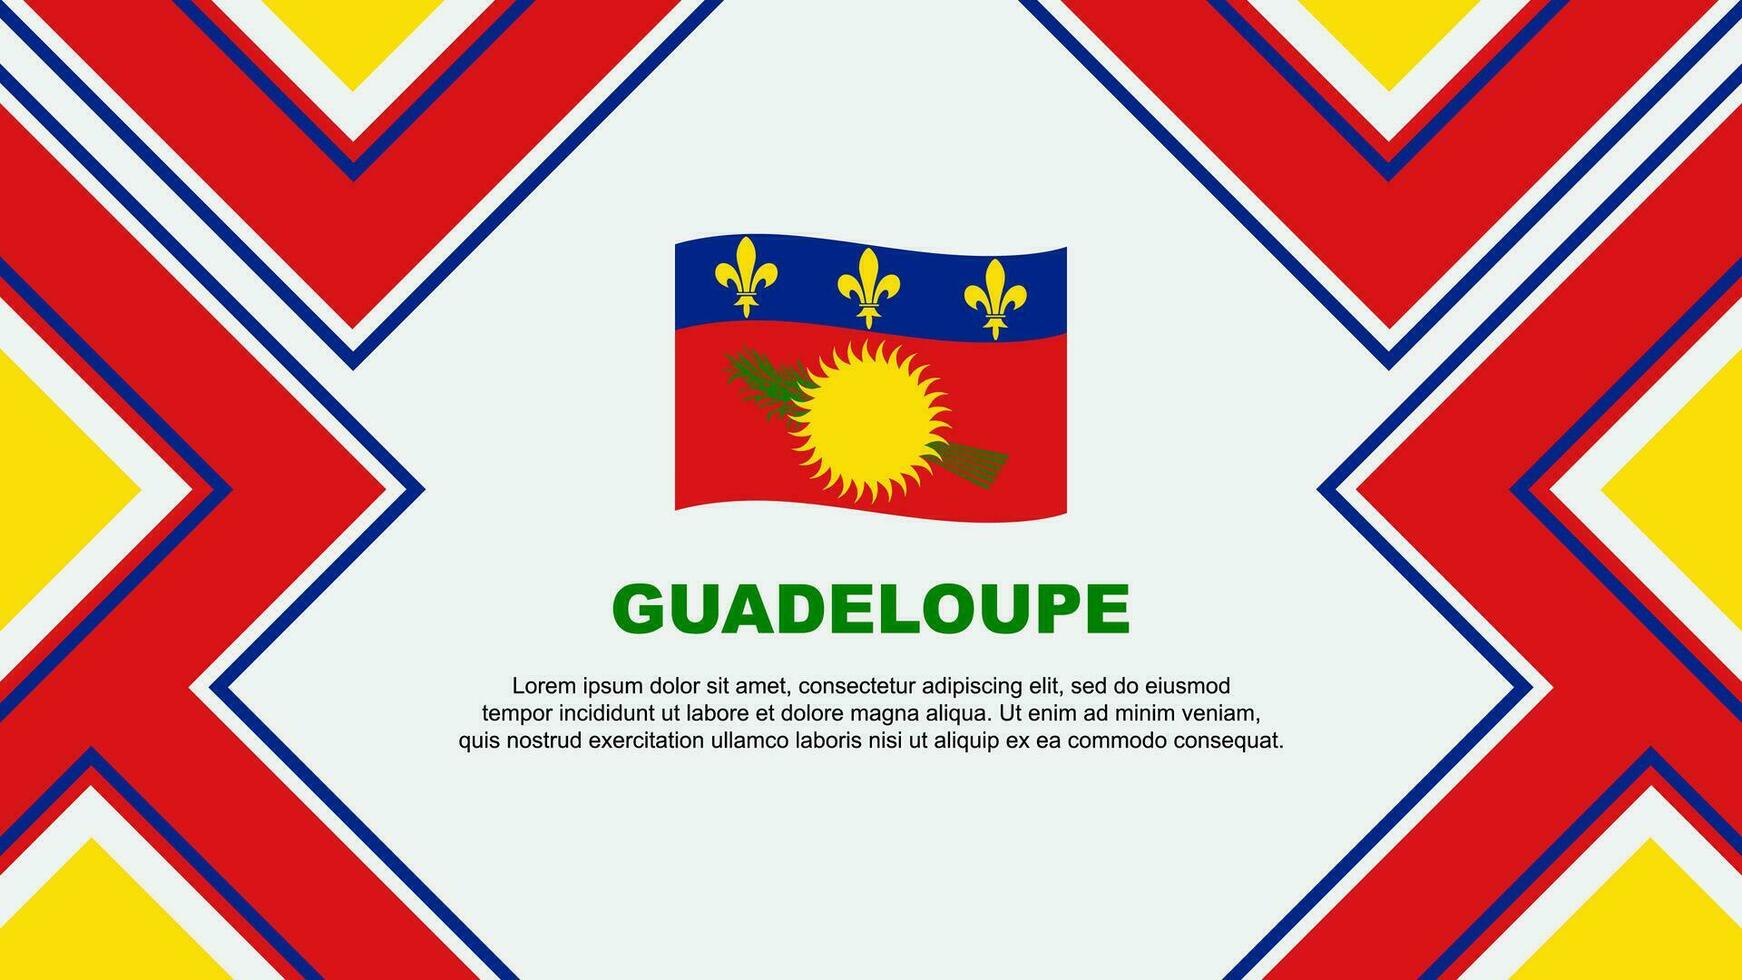 Guadeloupe Flag Abstract Background Design Template. Guadeloupe Independence Day Banner Wallpaper Vector Illustration. Guadeloupe Vector